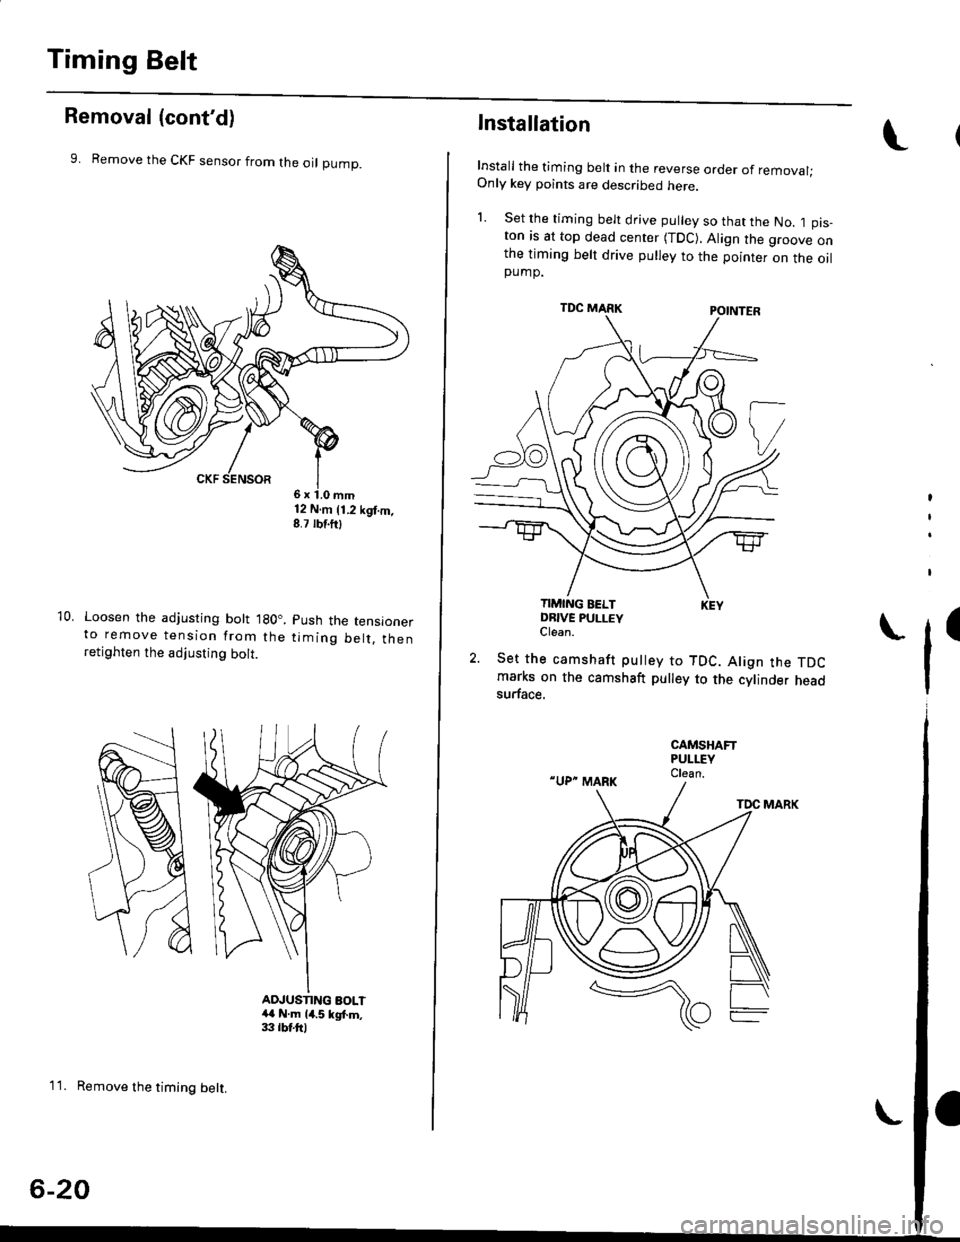 HONDA CIVIC 1997 6.G Workshop Manual Timing Belt
Removal (contd)
9. Remove the CKF sensor from the oI pump.
10. Loosen the adjusting bott lgO..to remove tension from theretighten the adjusting bolt.
12 N.m 11.2 kgt.m,8.7 rbf.ftl
Push th